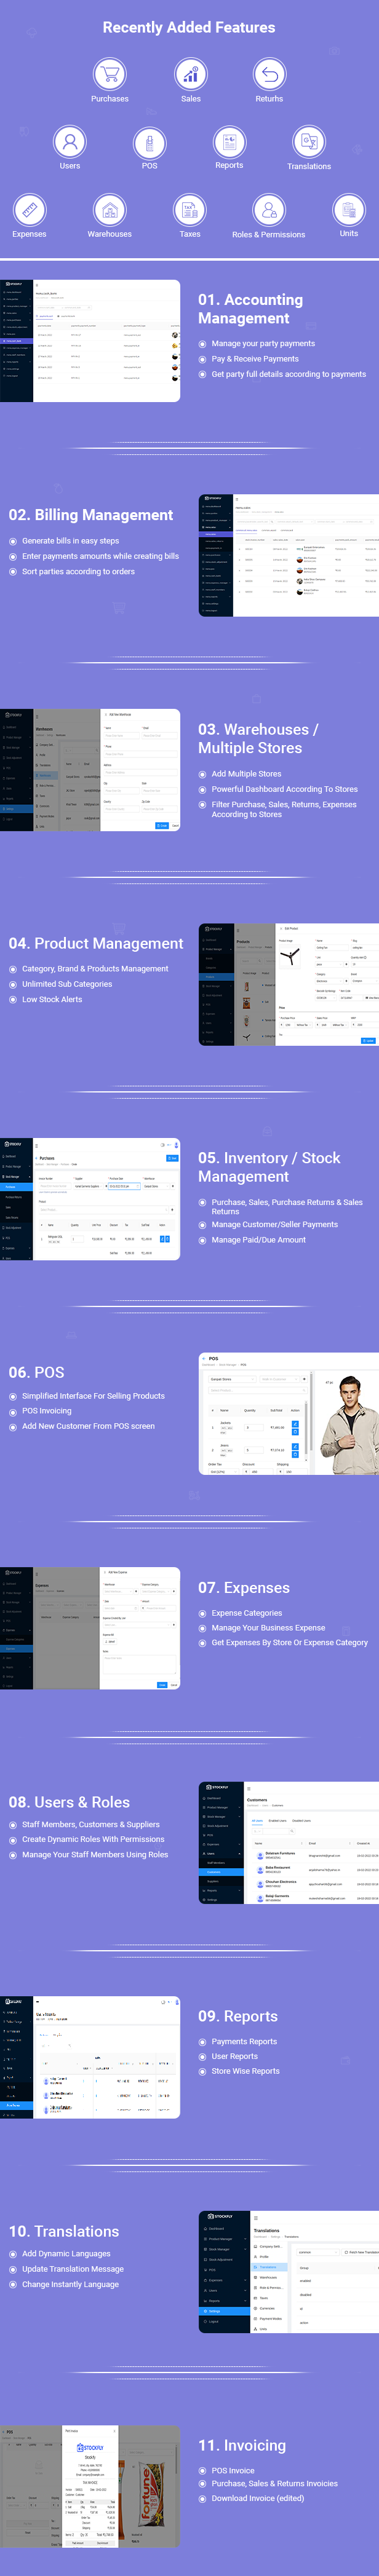 Stockifly -  Billing & Inventory Management with POS